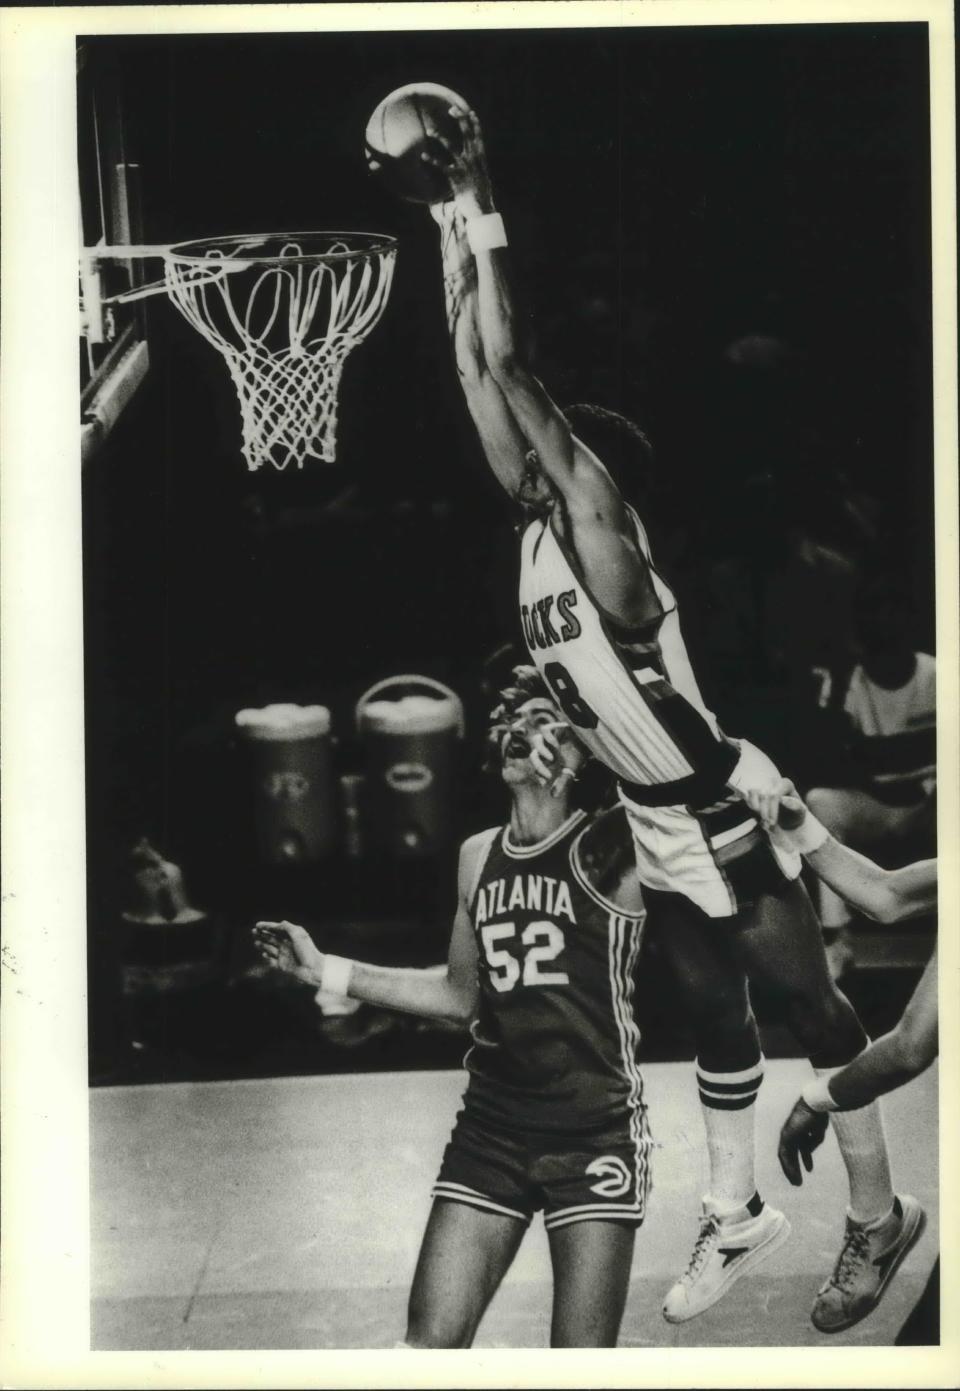 Marques Johnson soars in for a dunk against Atlanta during 1977 in his first season with the Milwaukee Bucks.